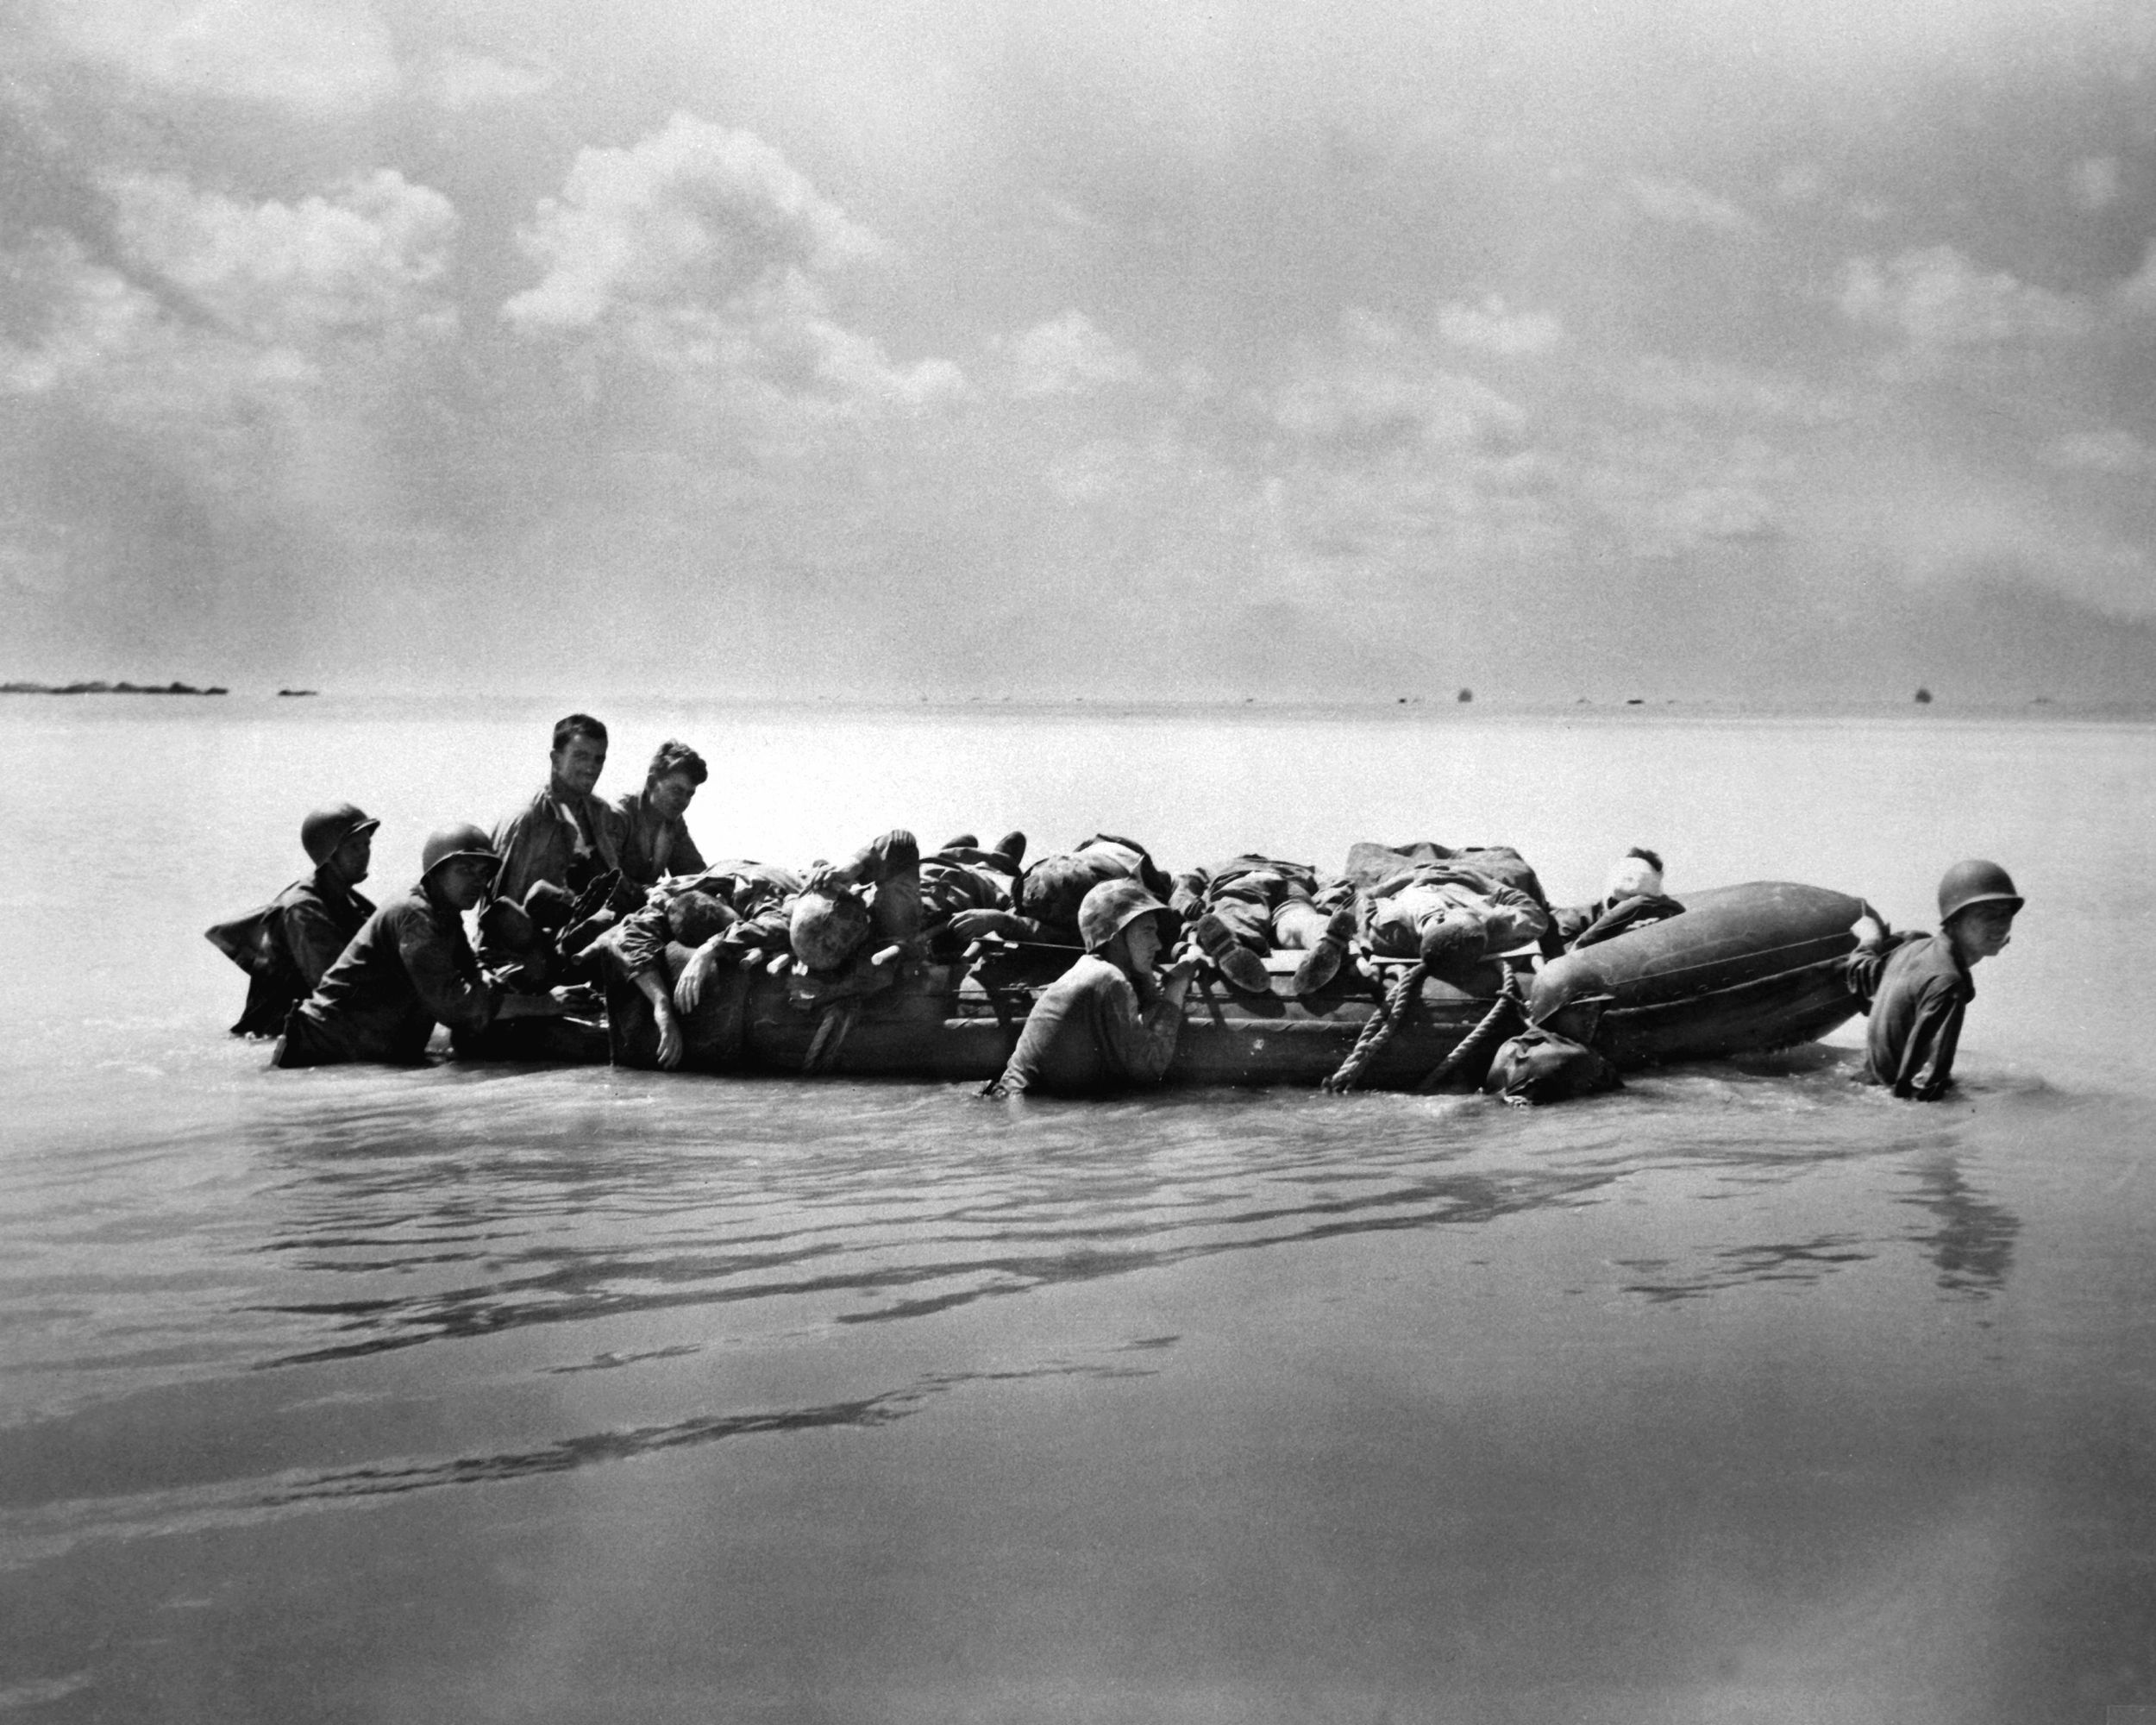 Many of the wounded Marines had to be ferried out to the edge of the coral reef aboard rubber boats like this one for evacuation to larger vessels that would take them to hospital ships offshore.